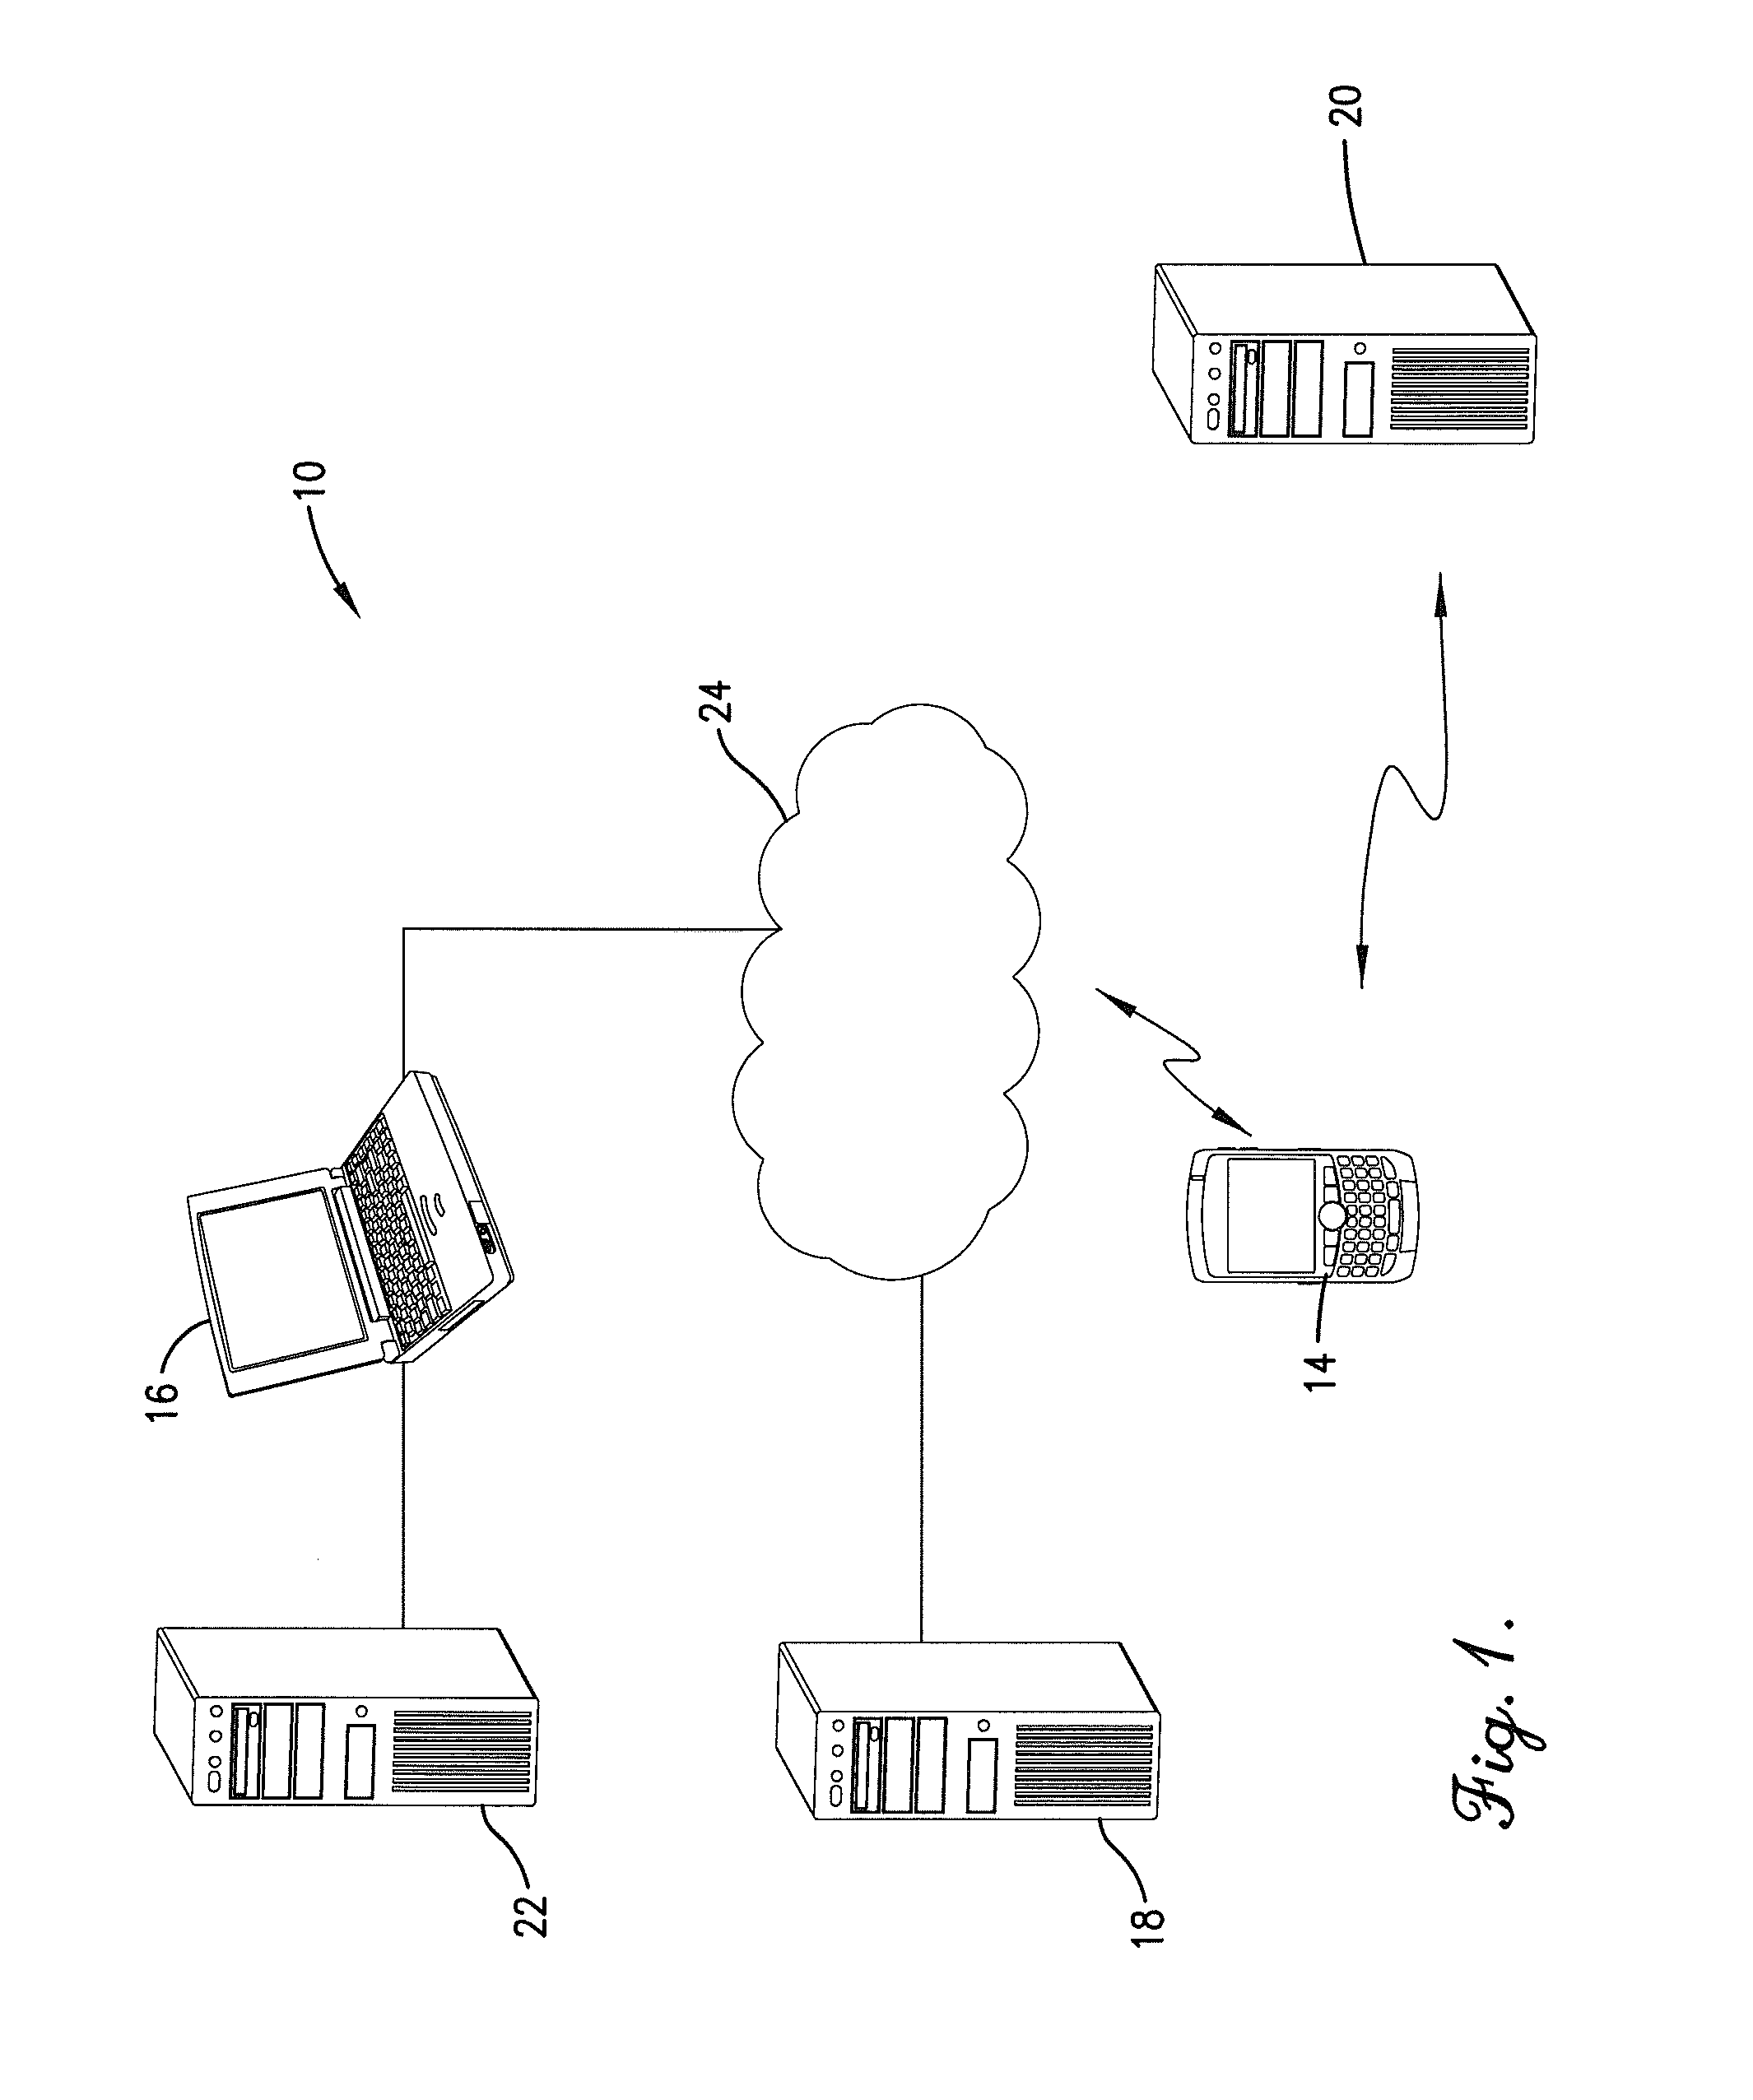 System and Method for Remote Veterinary Image Analysis and Consultation